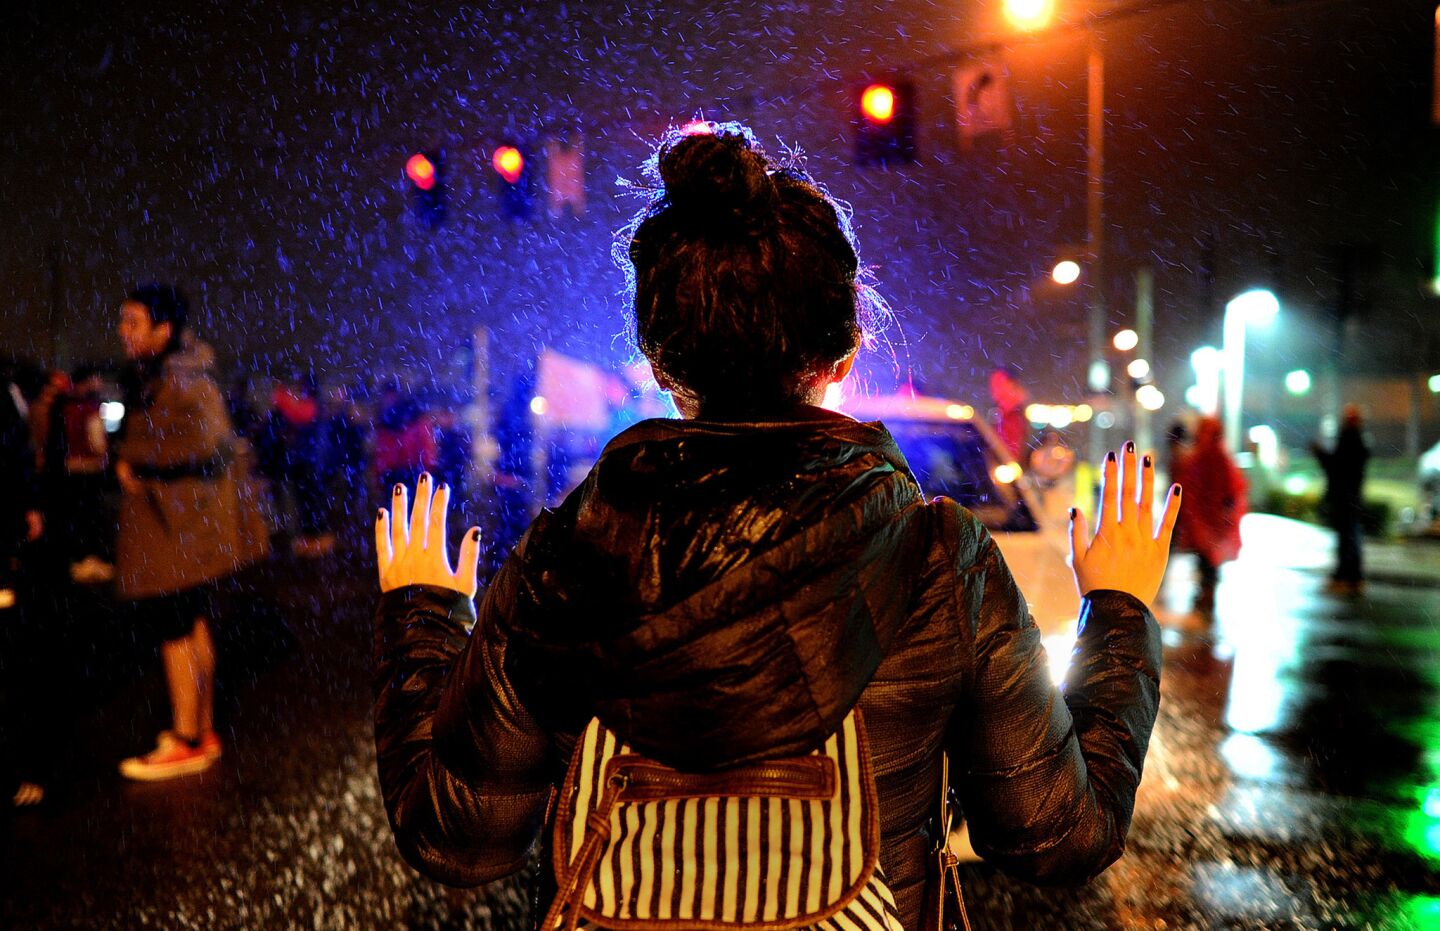 A protester holds her hands up in front of a police car during a demonstration in St. Louis, Mo., on Nov. 23.